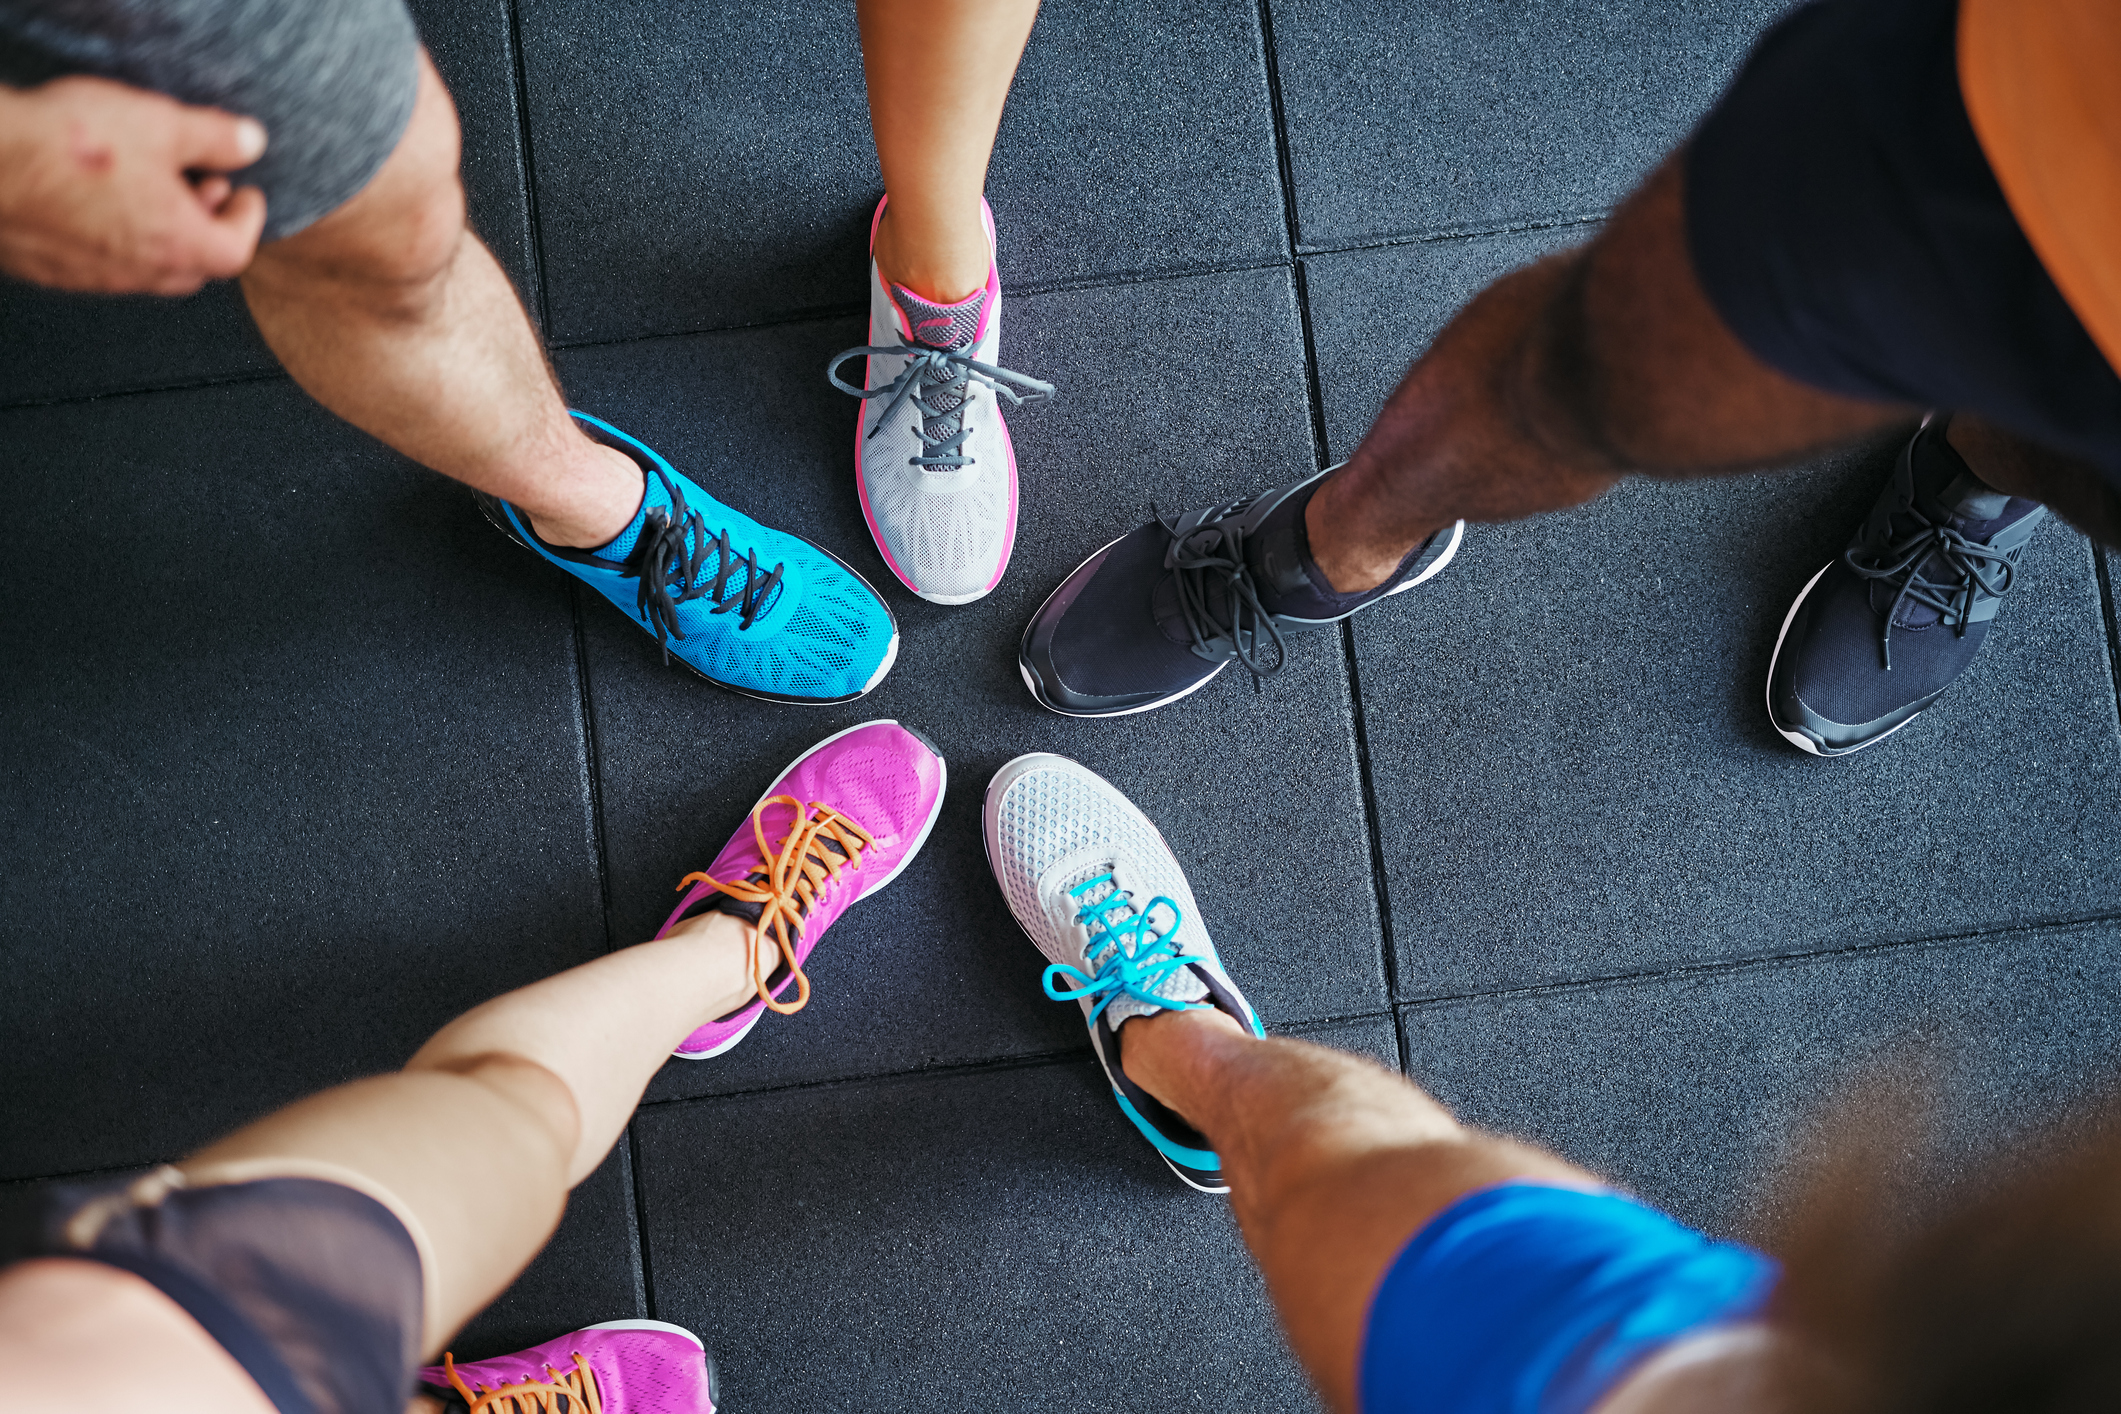 High angle of a group of sporty people's feet wearing running shoes standing together in a huddle on a gym floor